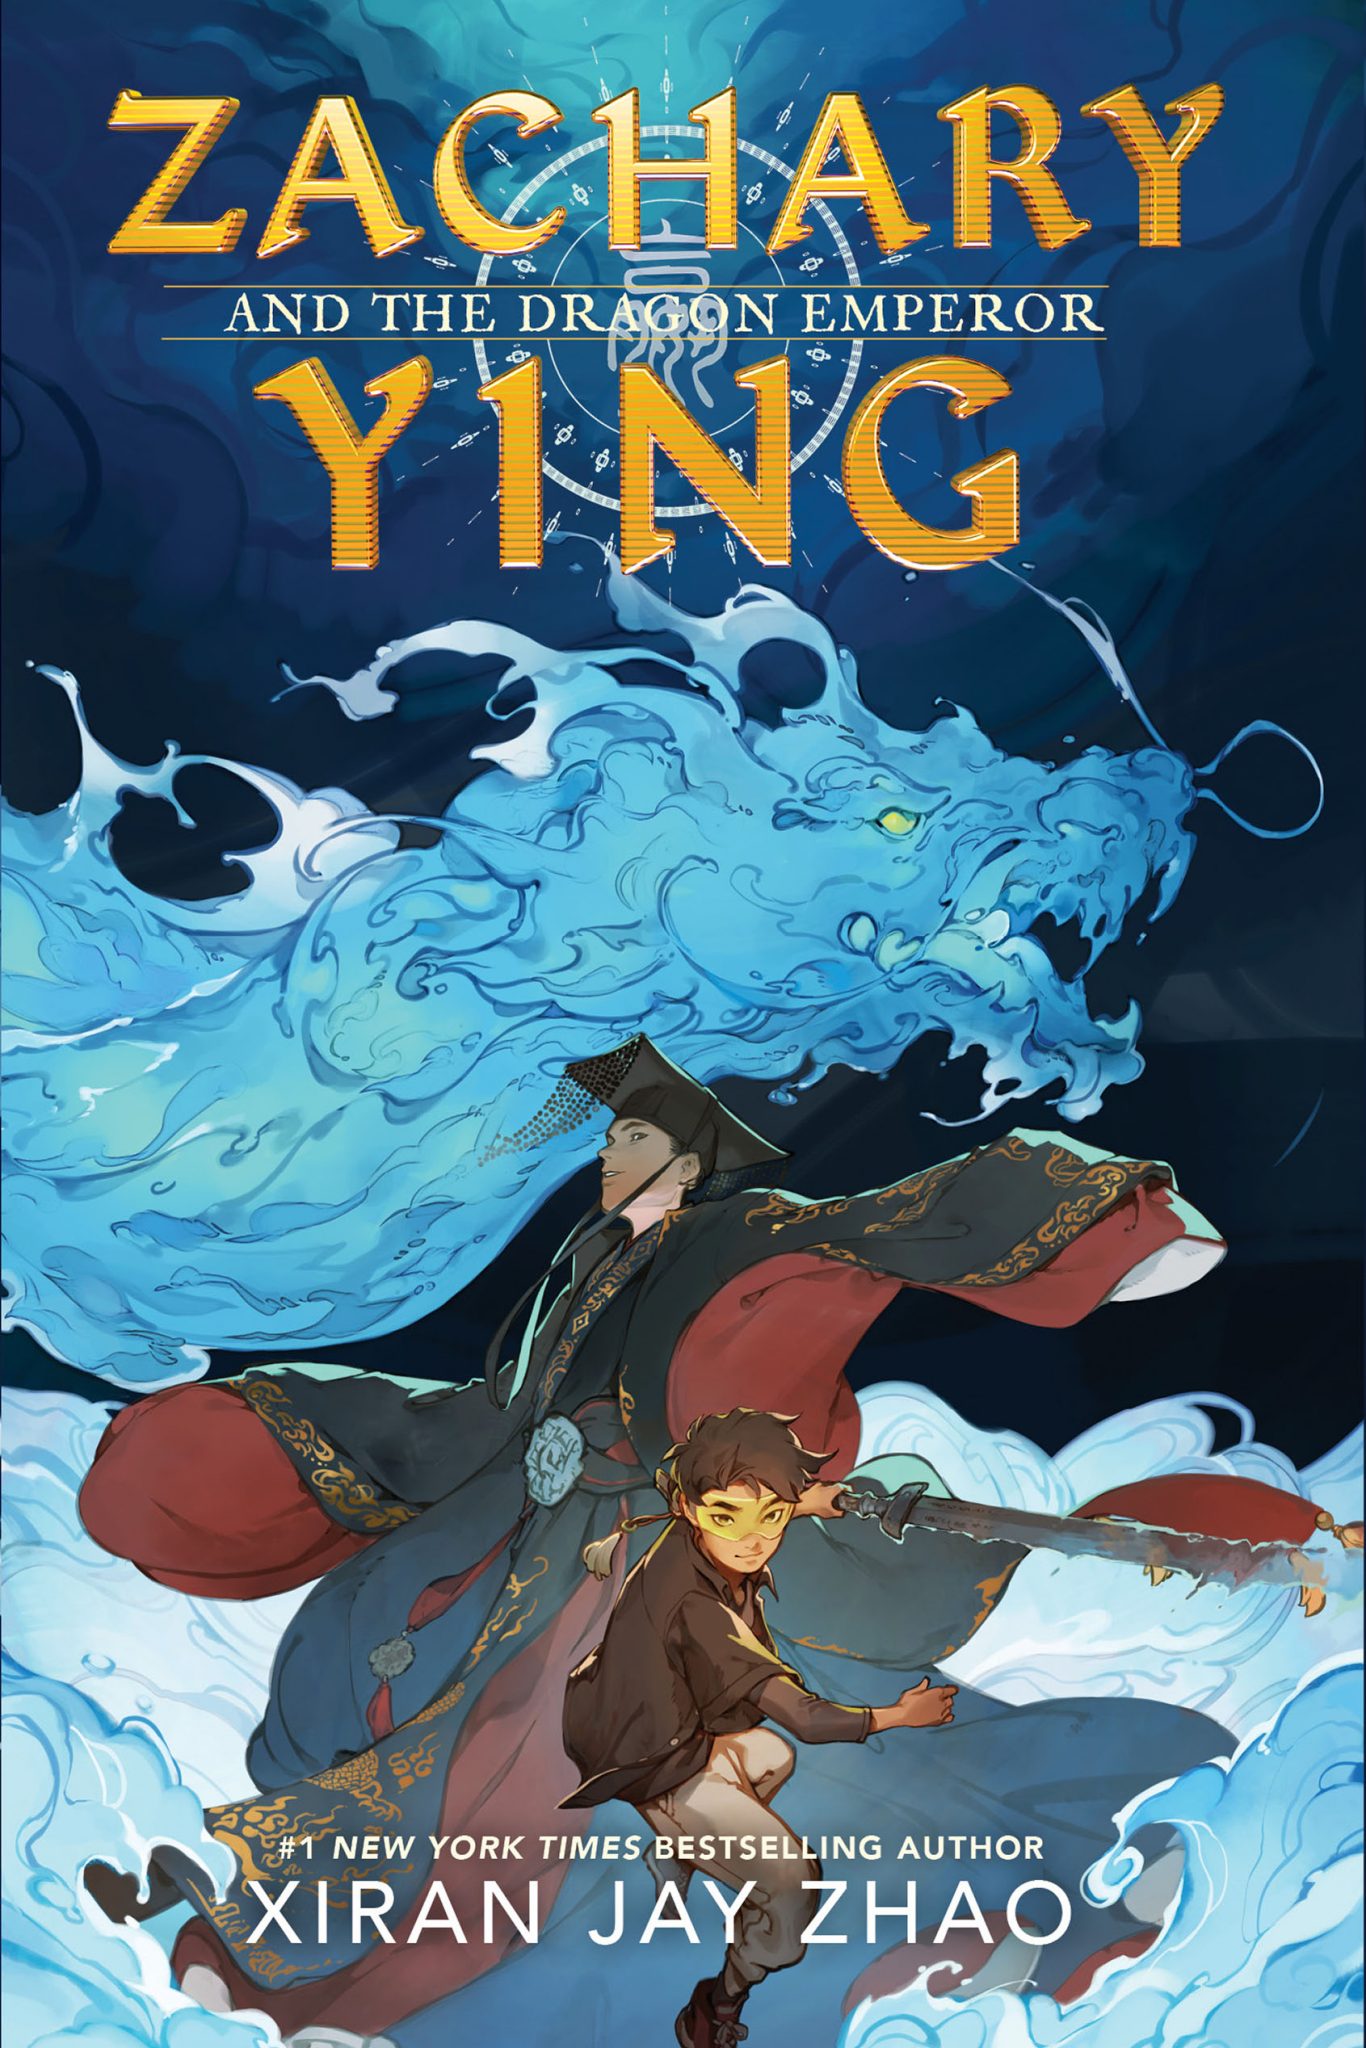 zachary ying and the dragon emperor sequel